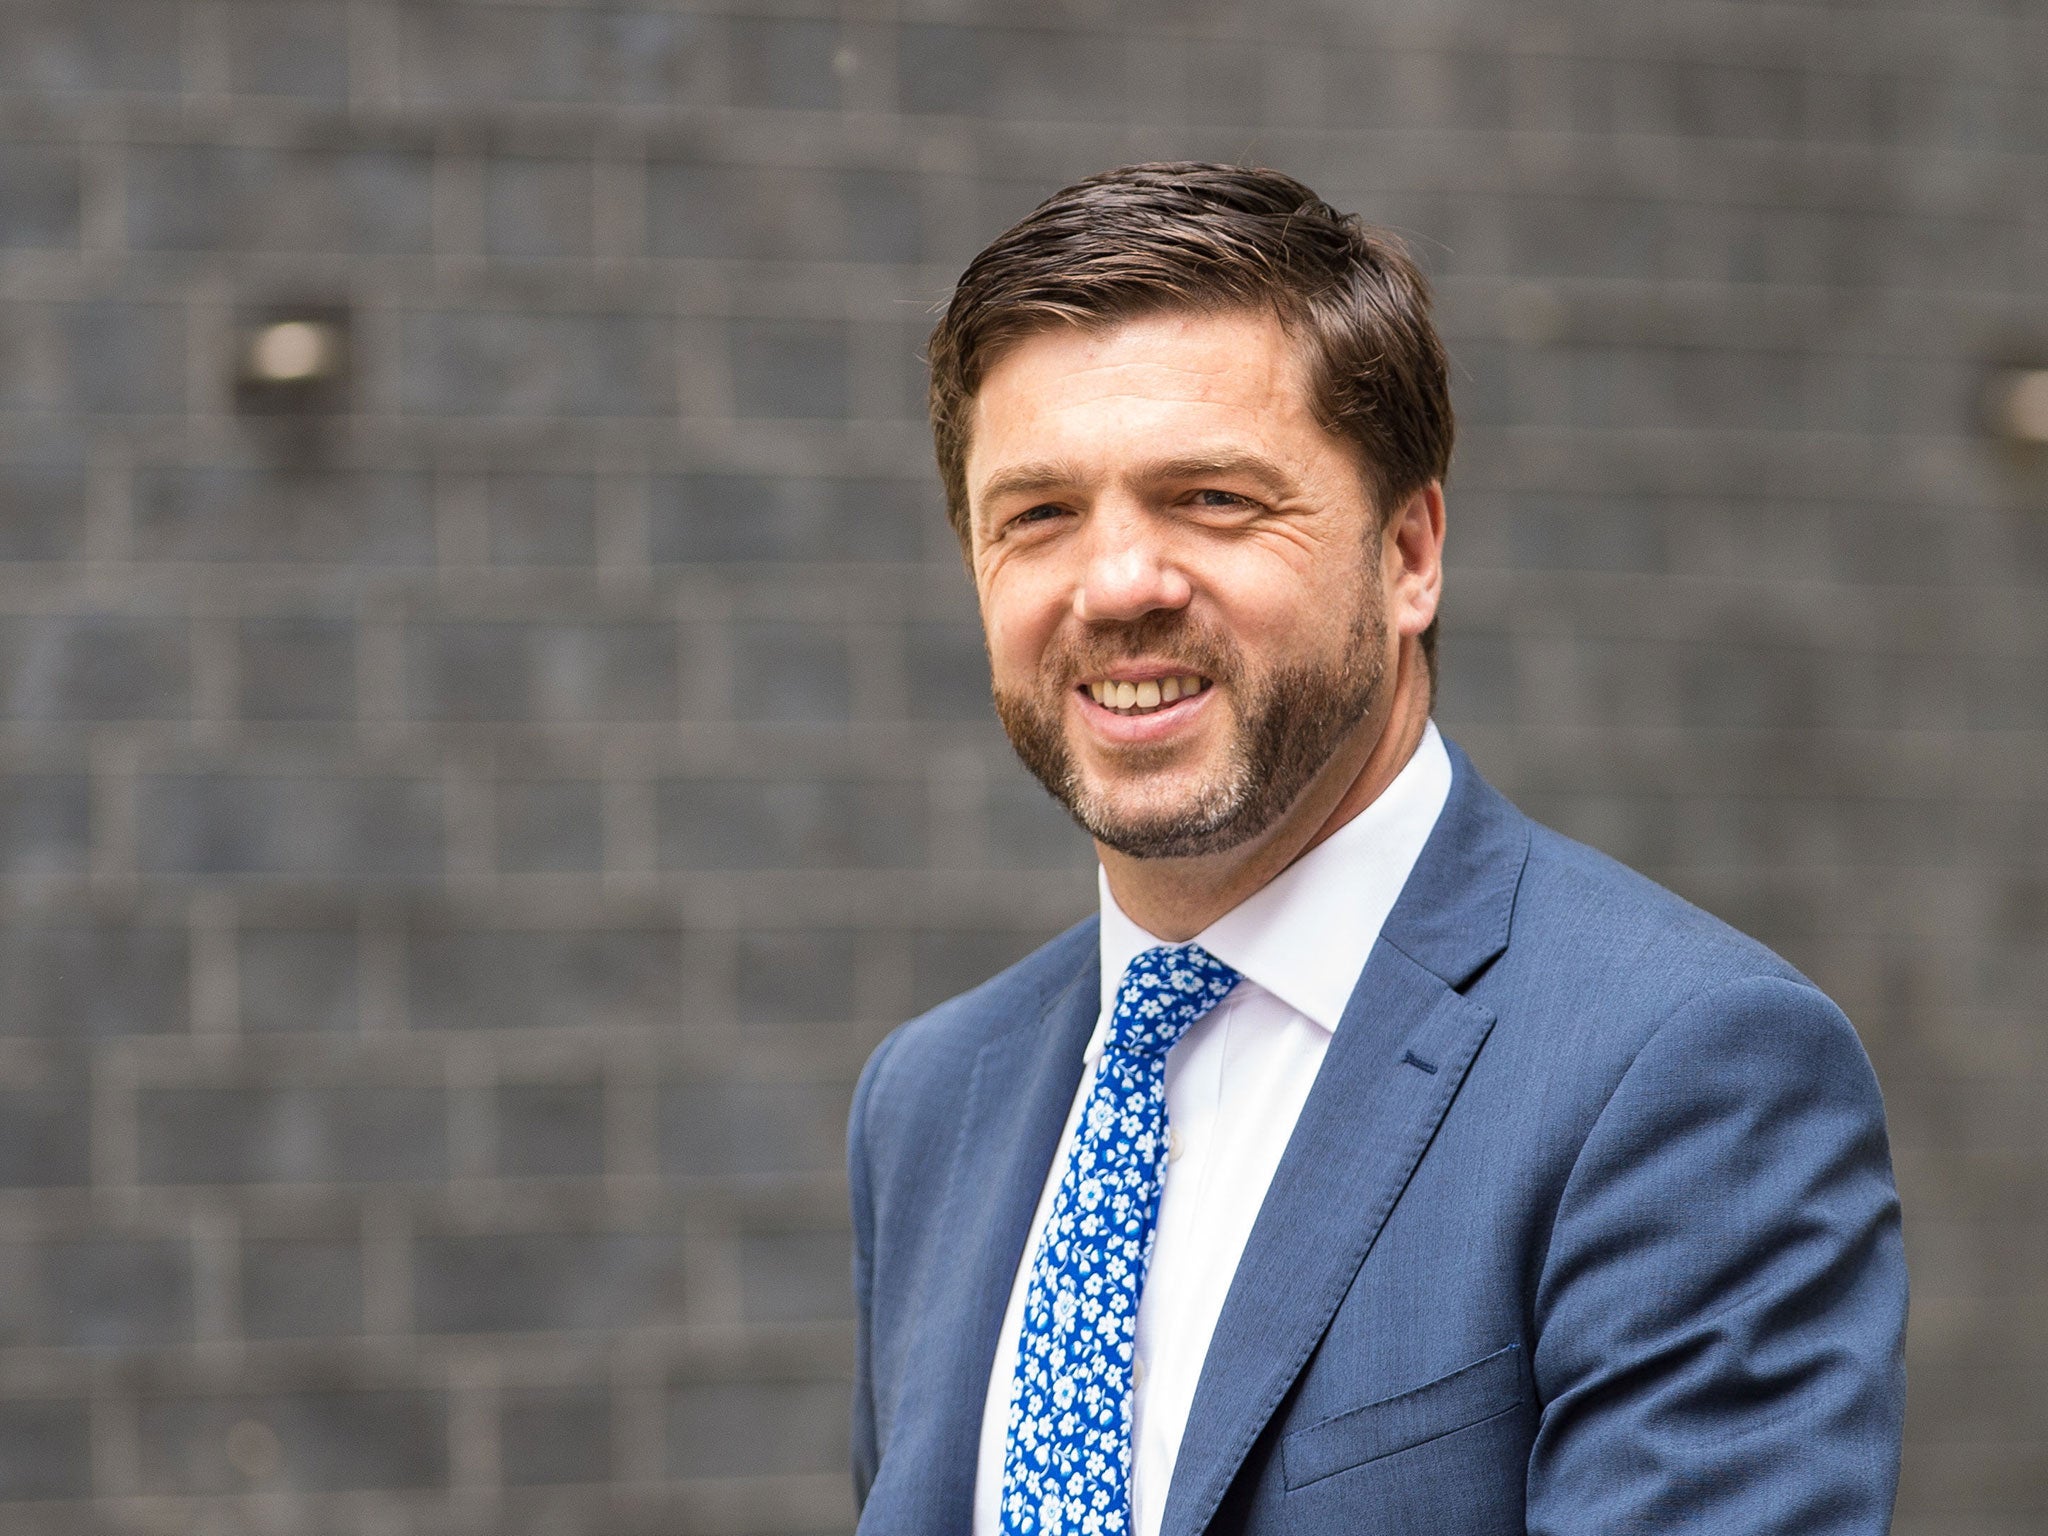 Stephen Crabb, 43, previously served as Welsh Secretary and has been an MP for Preseli Pembrokeshire since 2005